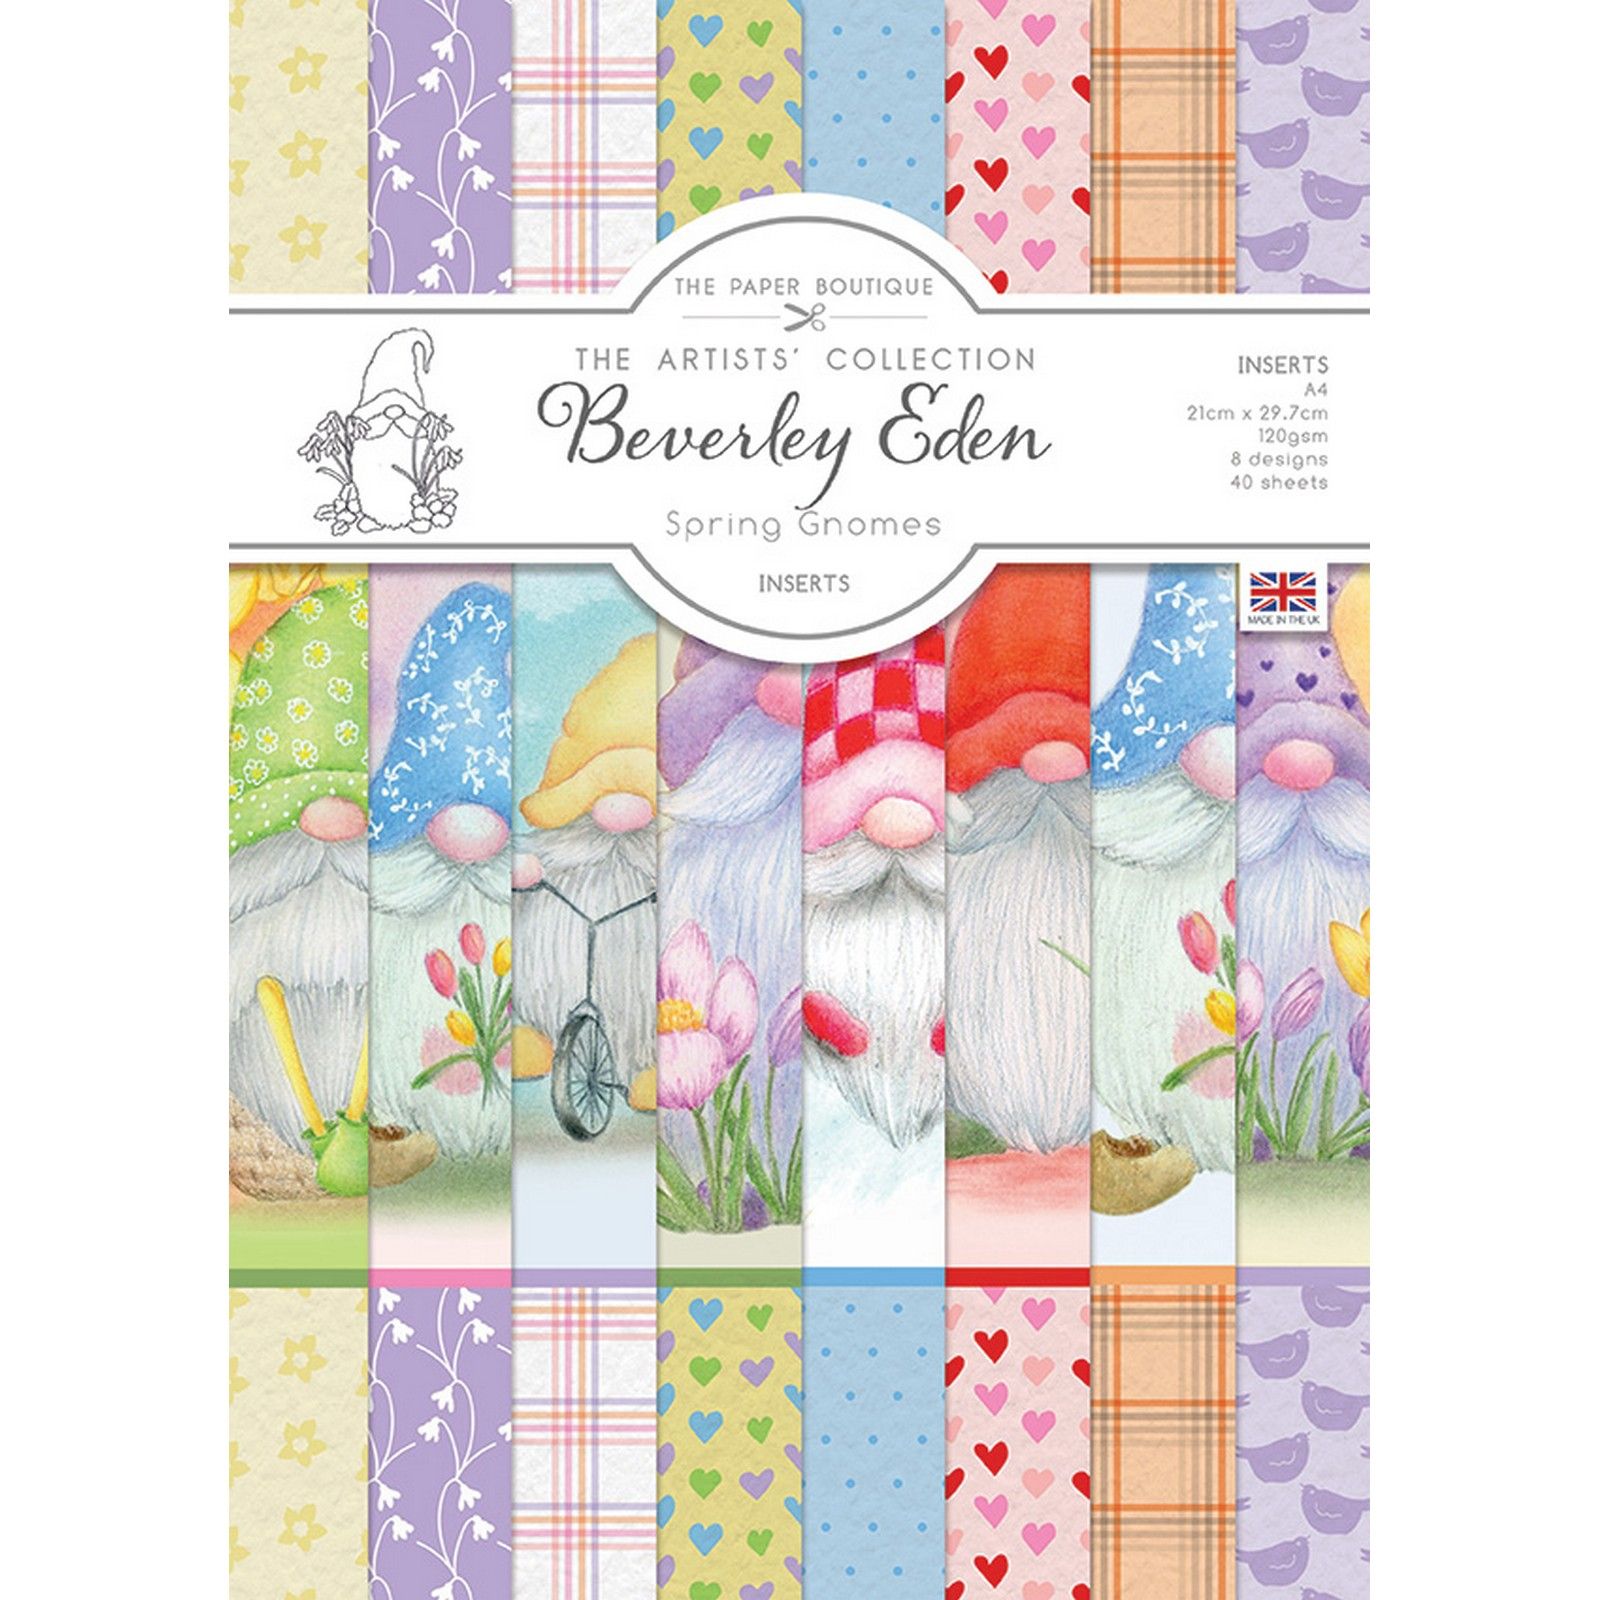 The Paper Boutique • Spring Gnomes Inserts